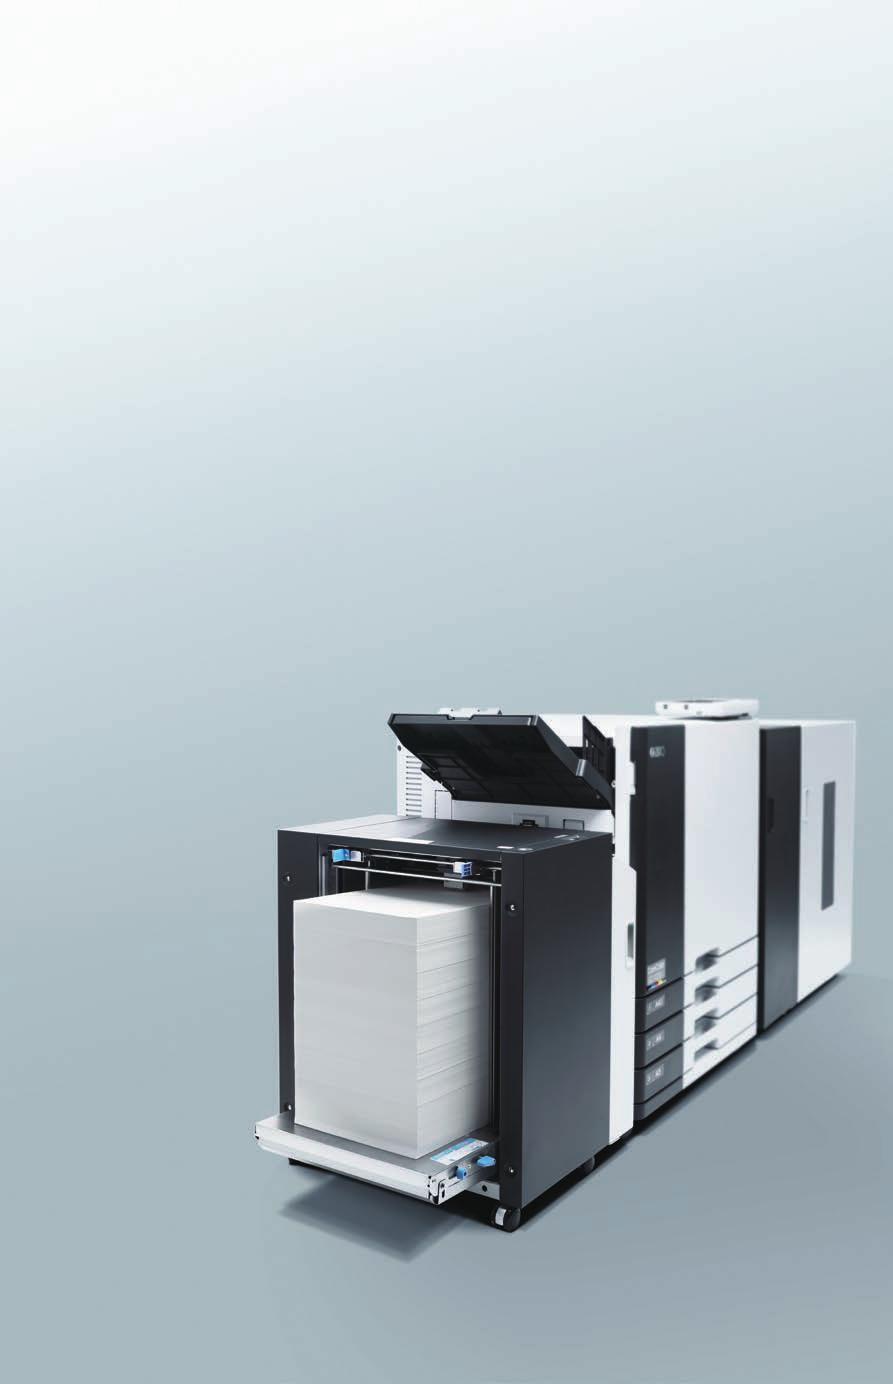 Built from the Ground up for the Demands of High-volume Printing Small Footprint, Big Output The ComColor GD series, which features a small footprint that makes it the ideal choice for all types of